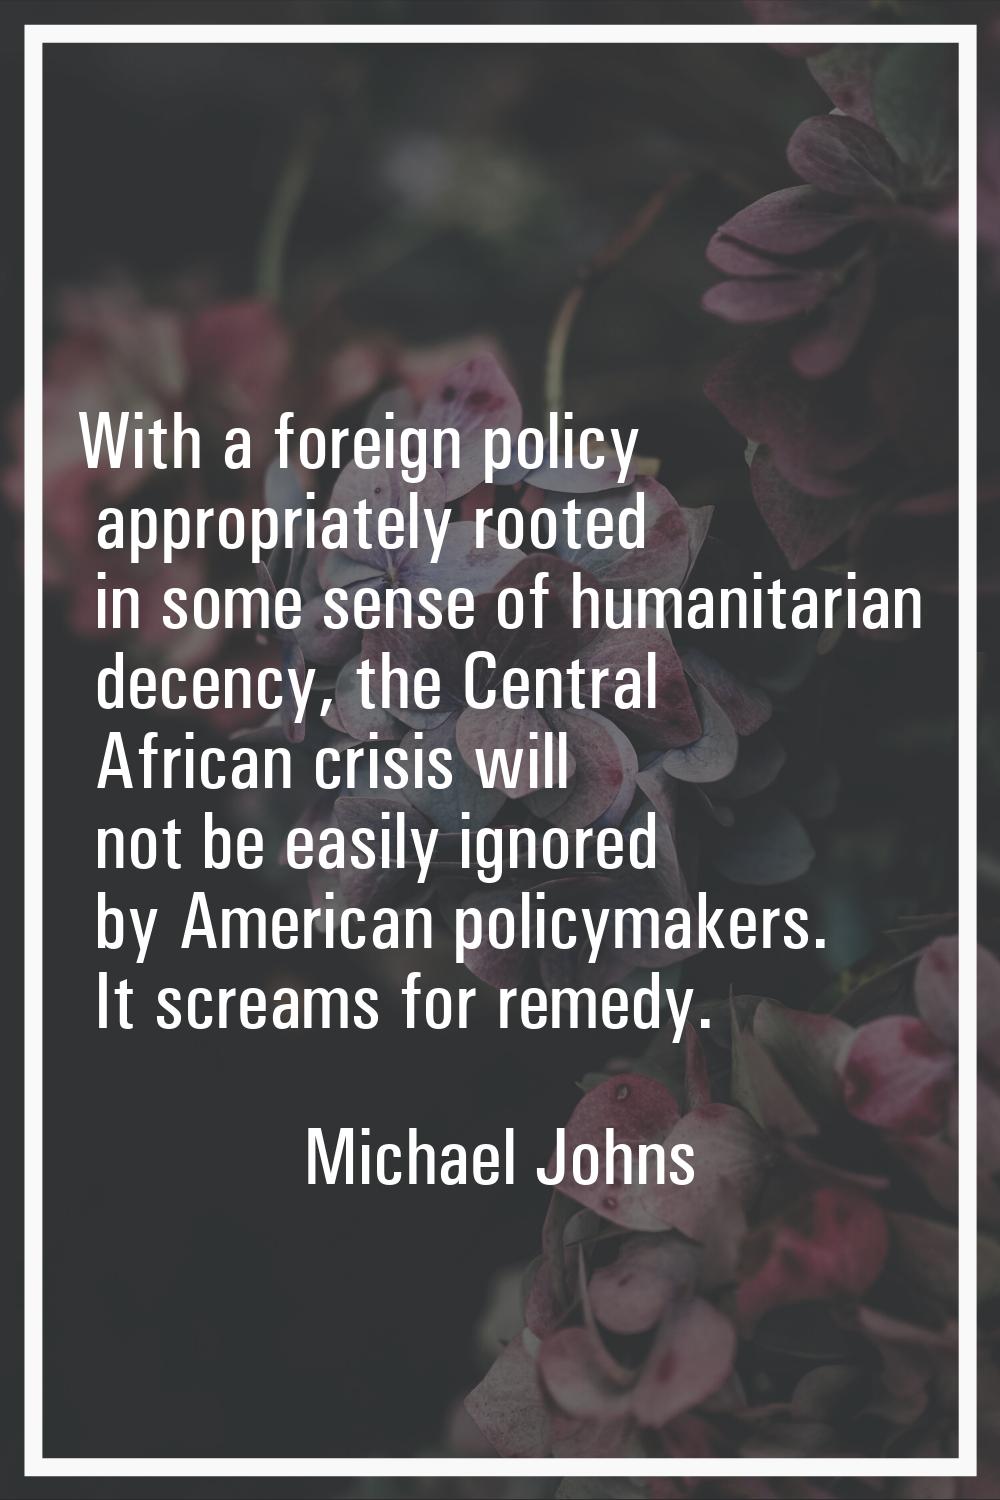 With a foreign policy appropriately rooted in some sense of humanitarian decency, the Central Afric